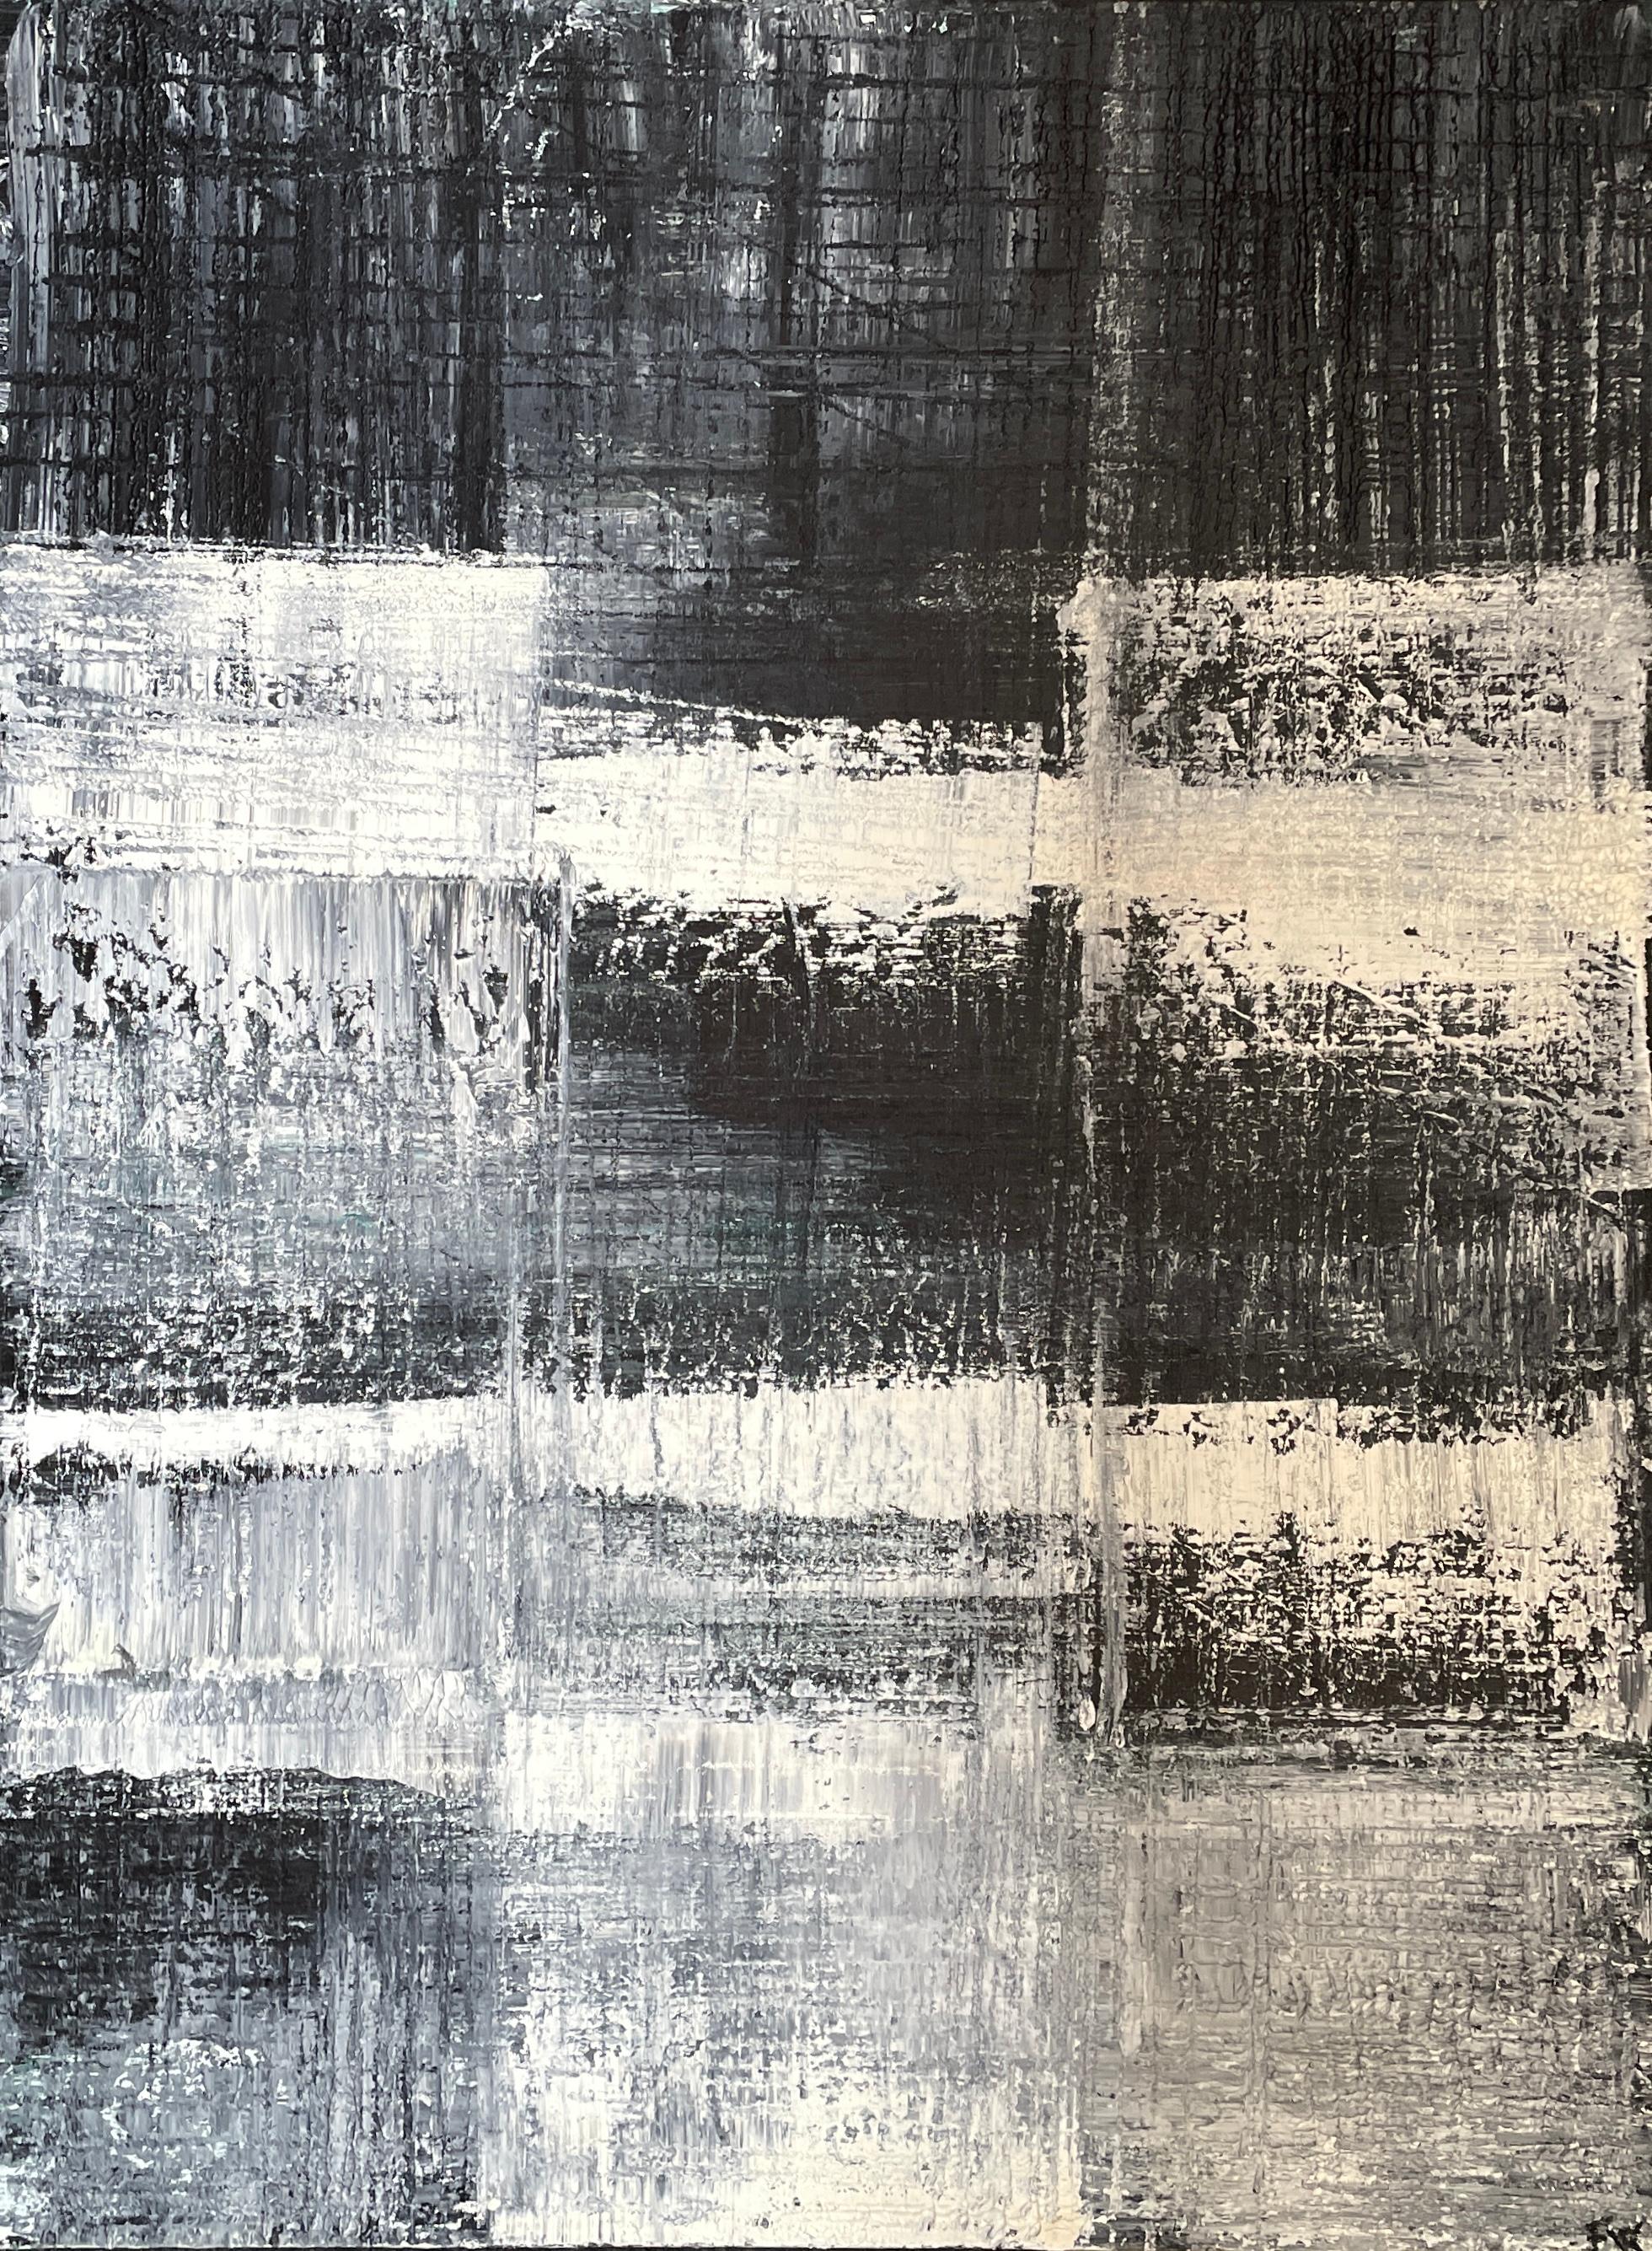 "Marshmallow Rising" by Frida Willis is an evocative piece of contemporary abstraction. Dominated by stark contrasts of monochrome shades, the 48" x 36" canvas is a visual symphony of textures and layers. Willis utilizes the subtlety of grays, the